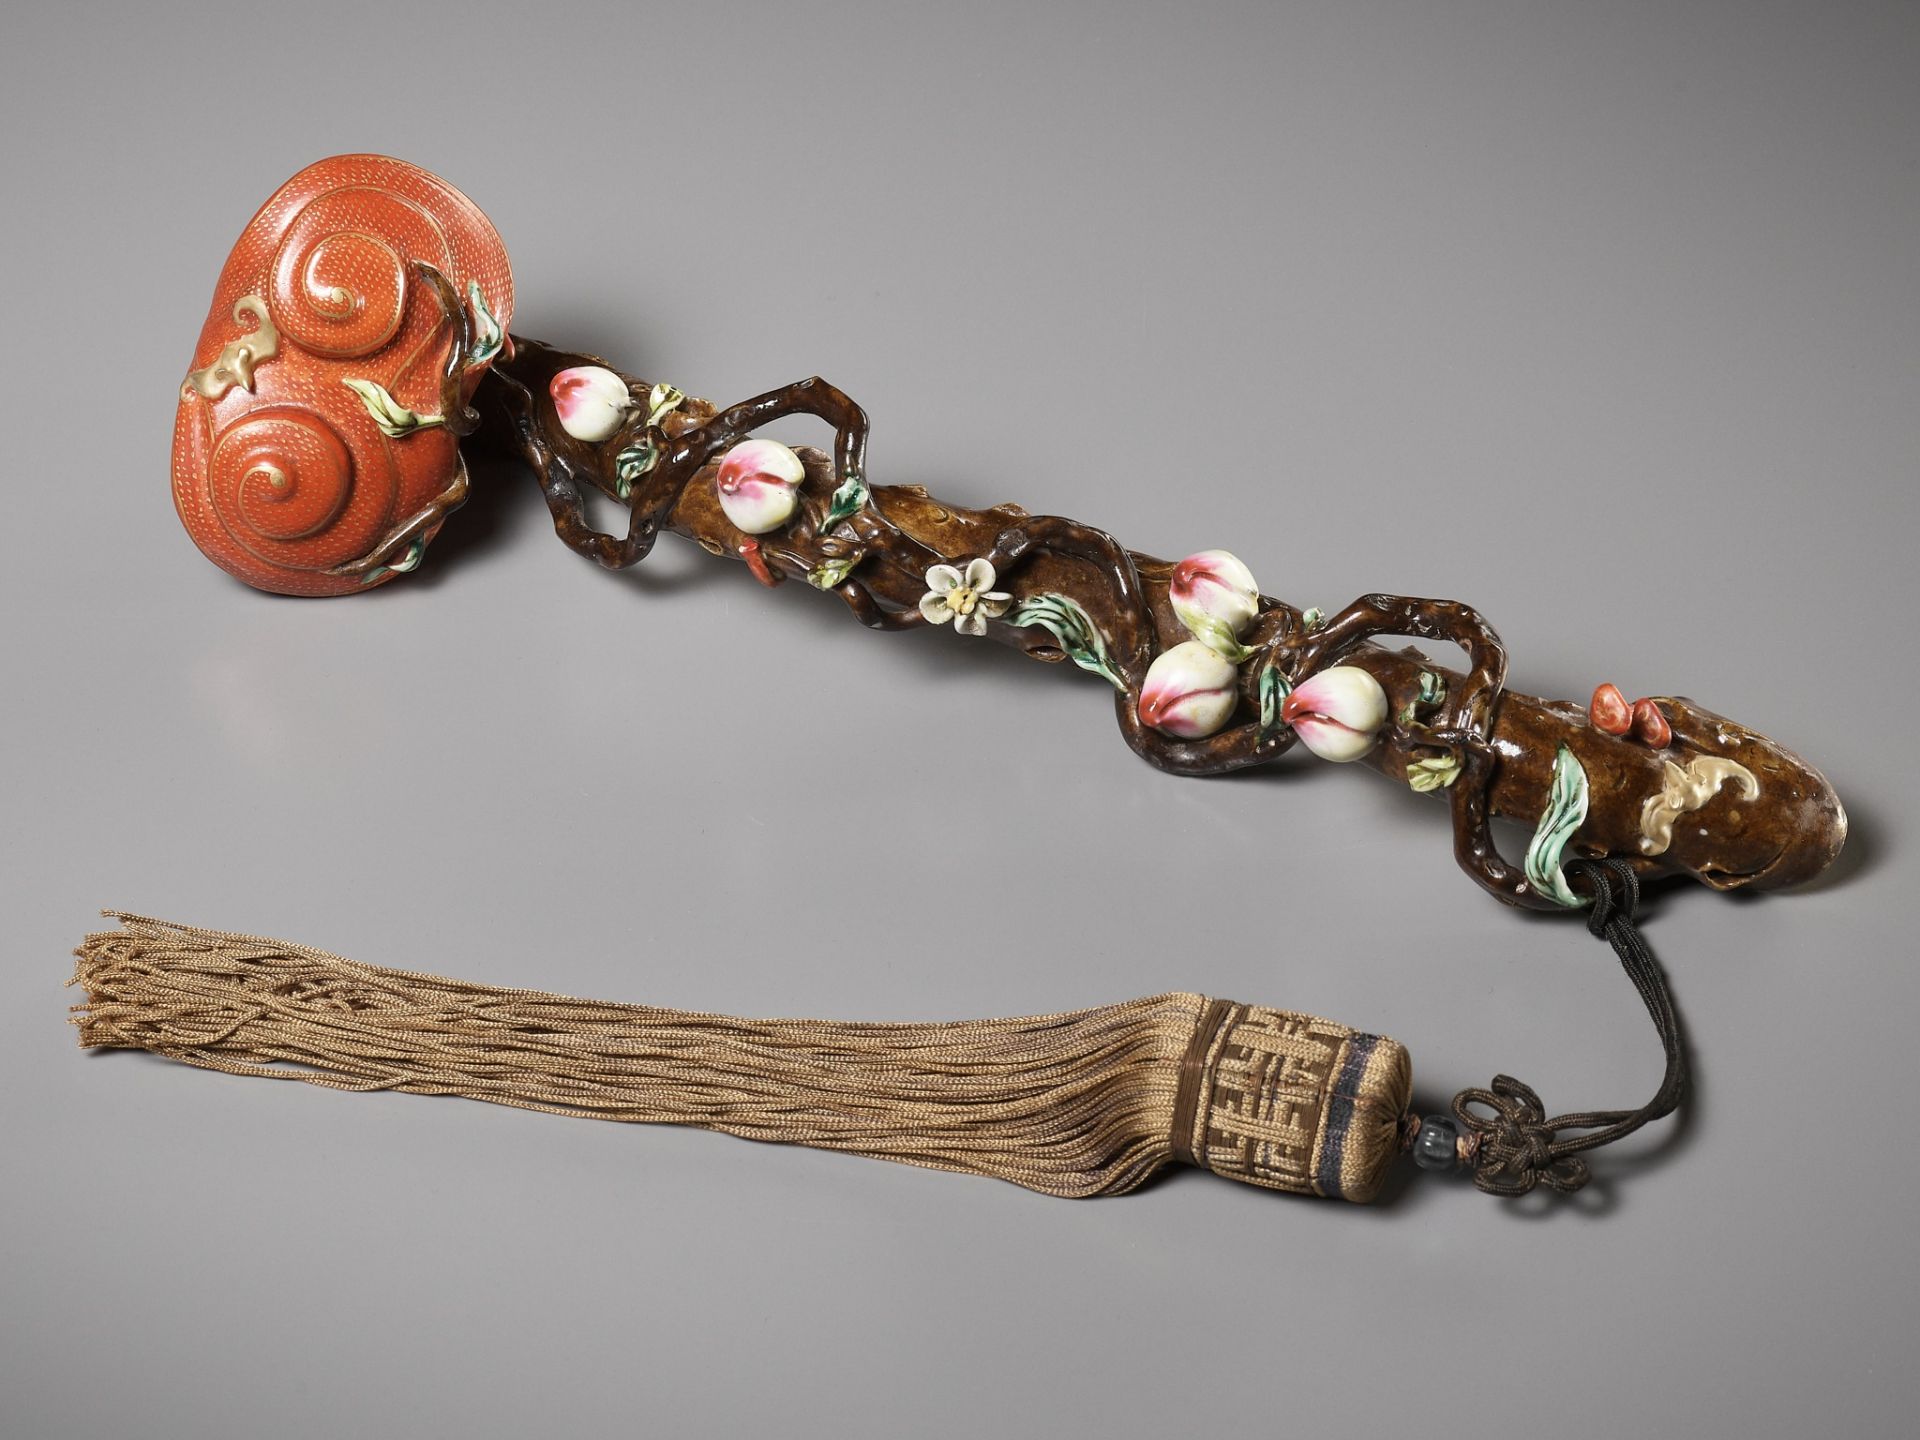 A FAMILLE ROSE PORCELAIN 'LINGZHI' RUYI SCEPTER, MID-QING DYNASTY